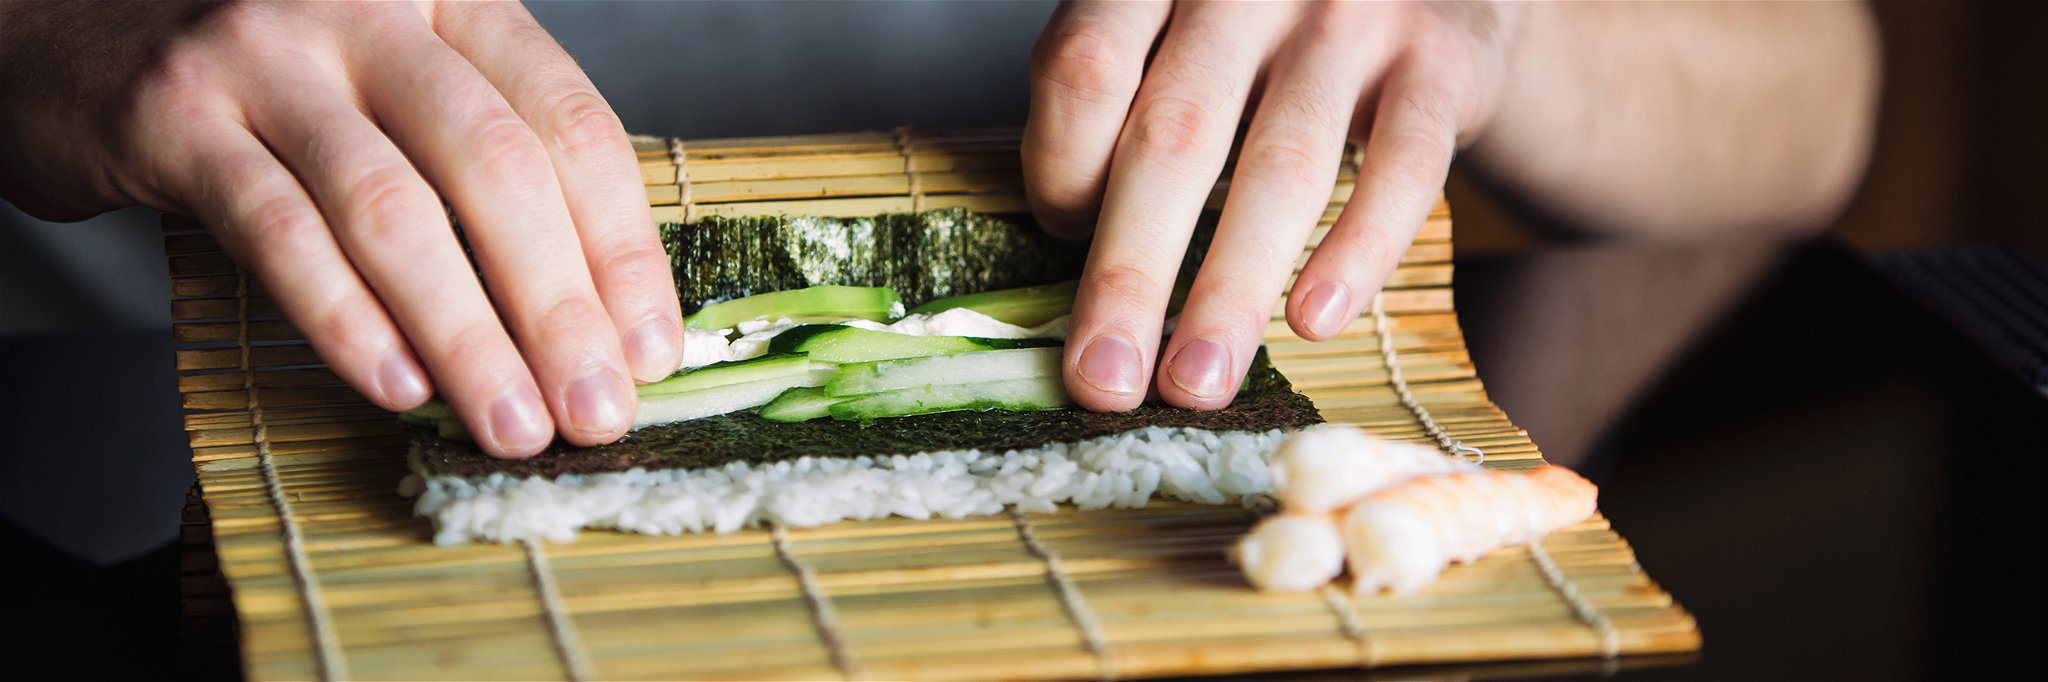 Rolling up sushi on a bamboo mat.